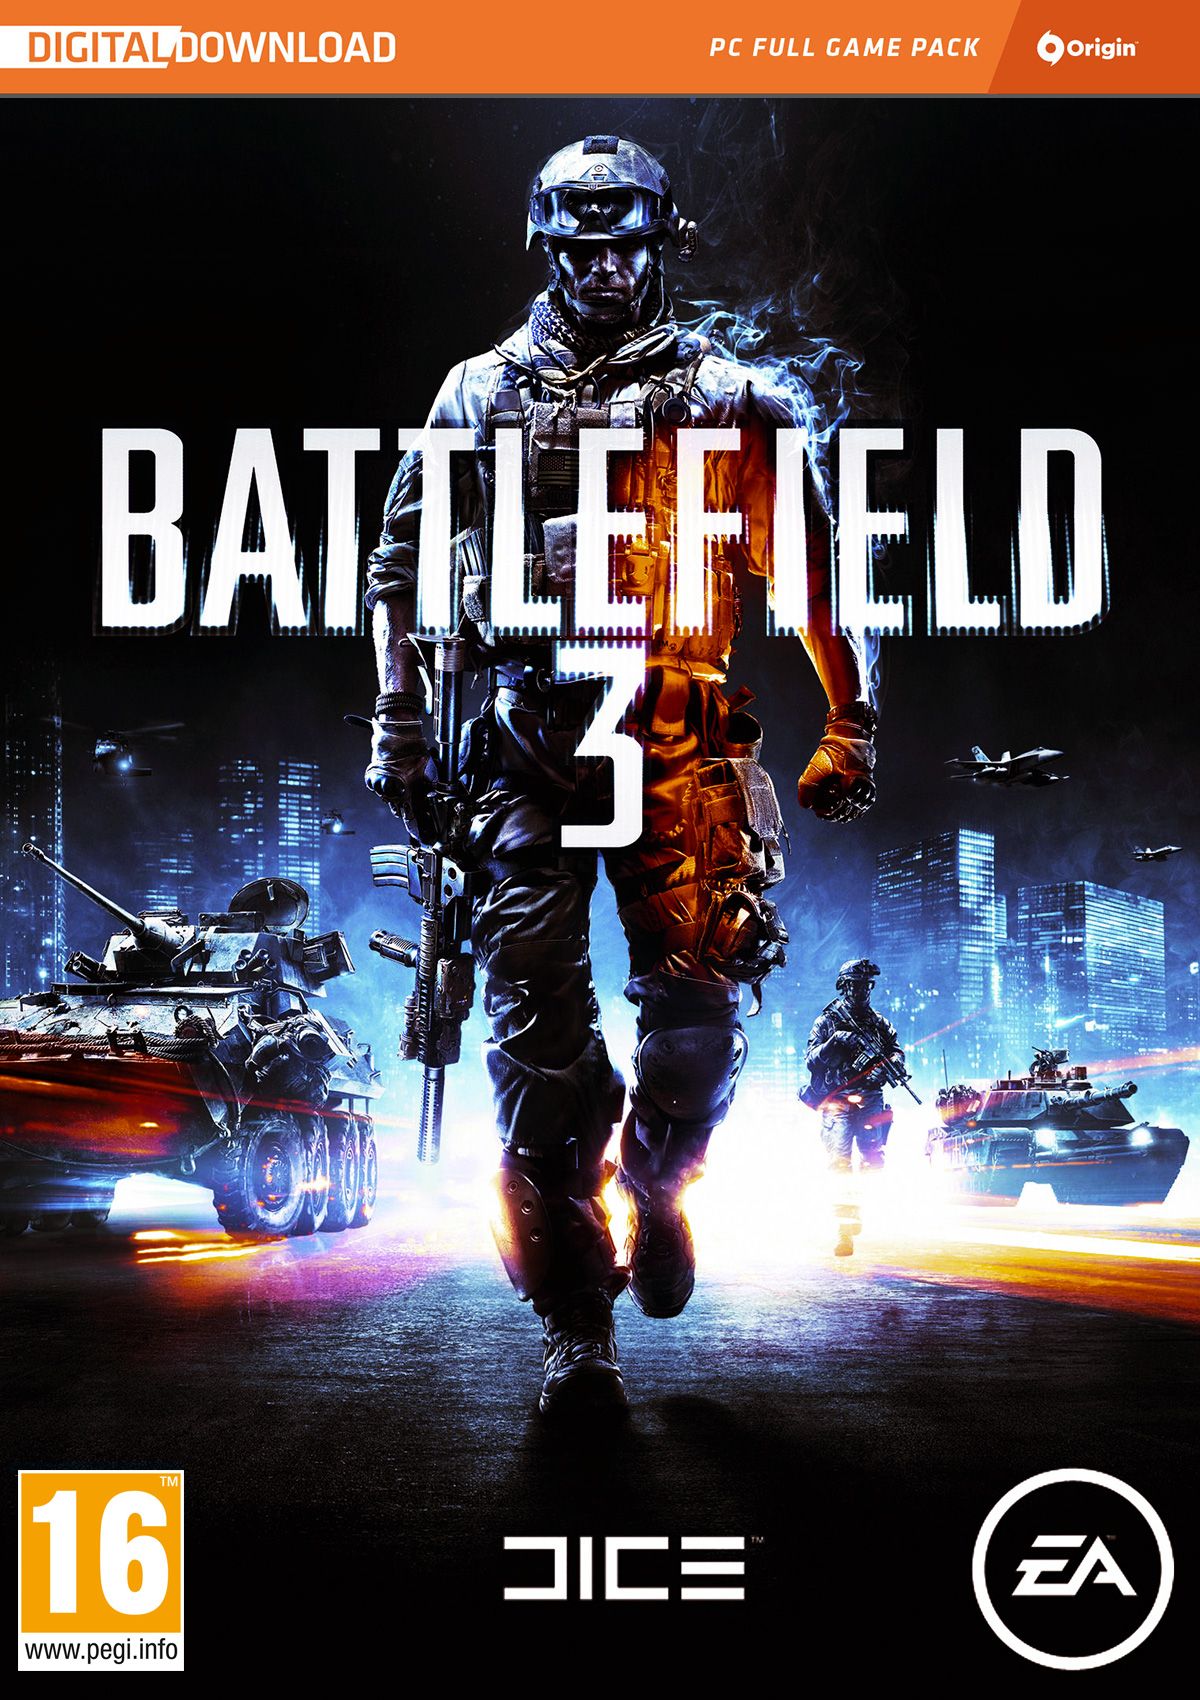 download battlefield3 ps4 for free